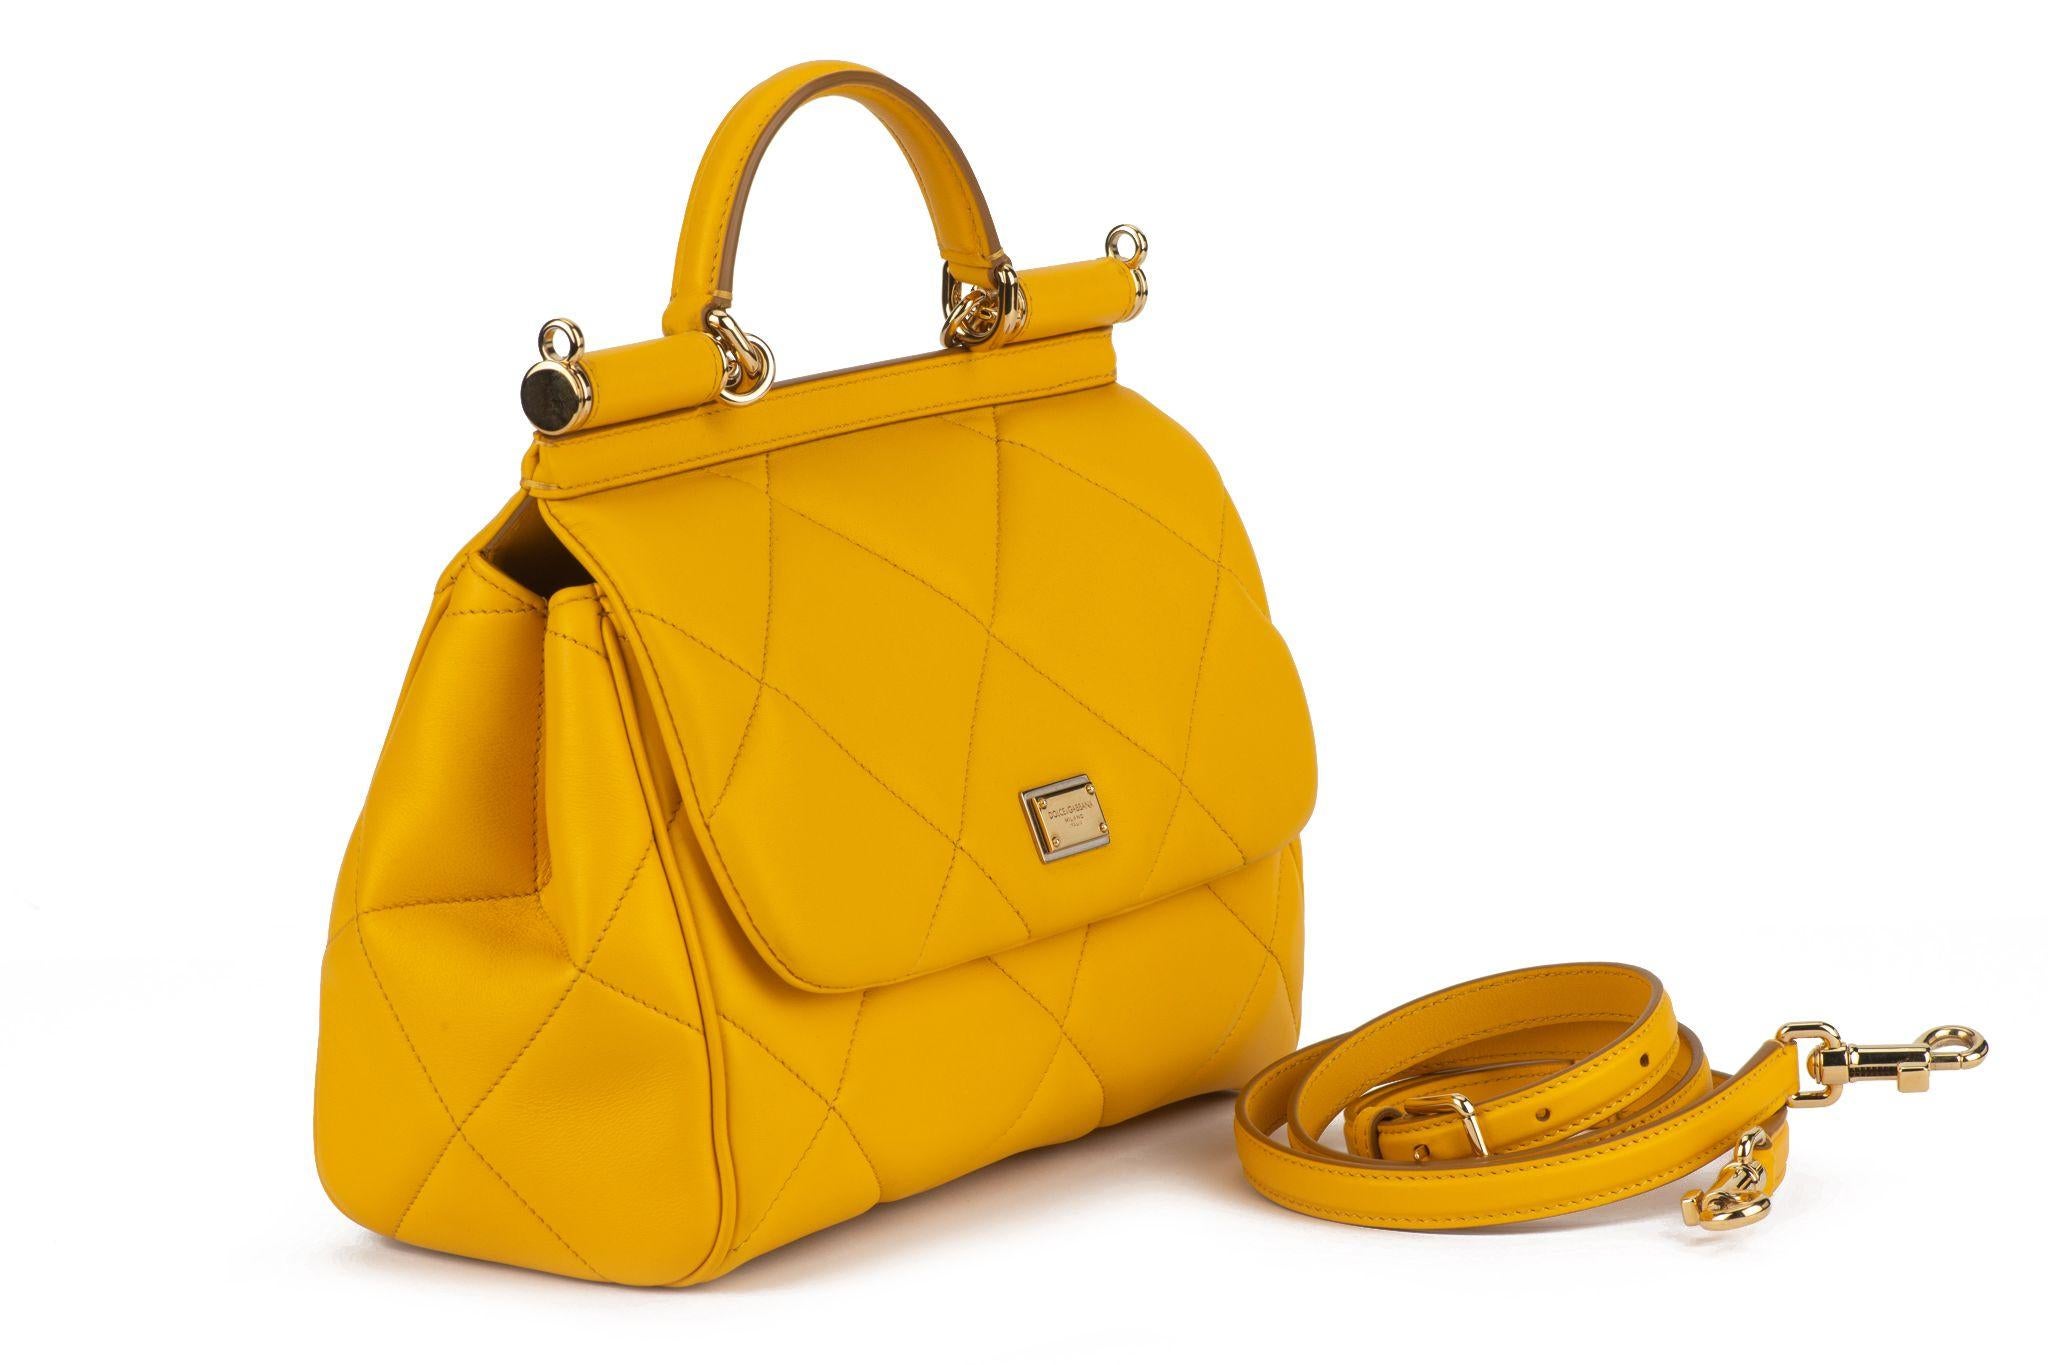 Dolce and Gabbana Sicily Handbag in yellow soleil quilted Aria Calfskin makes your look go from day to night in this casual sleek handbag. Featuring yellow calfskin leather, a  front flap with hidden double magnetic fastening, logo tag featuring two